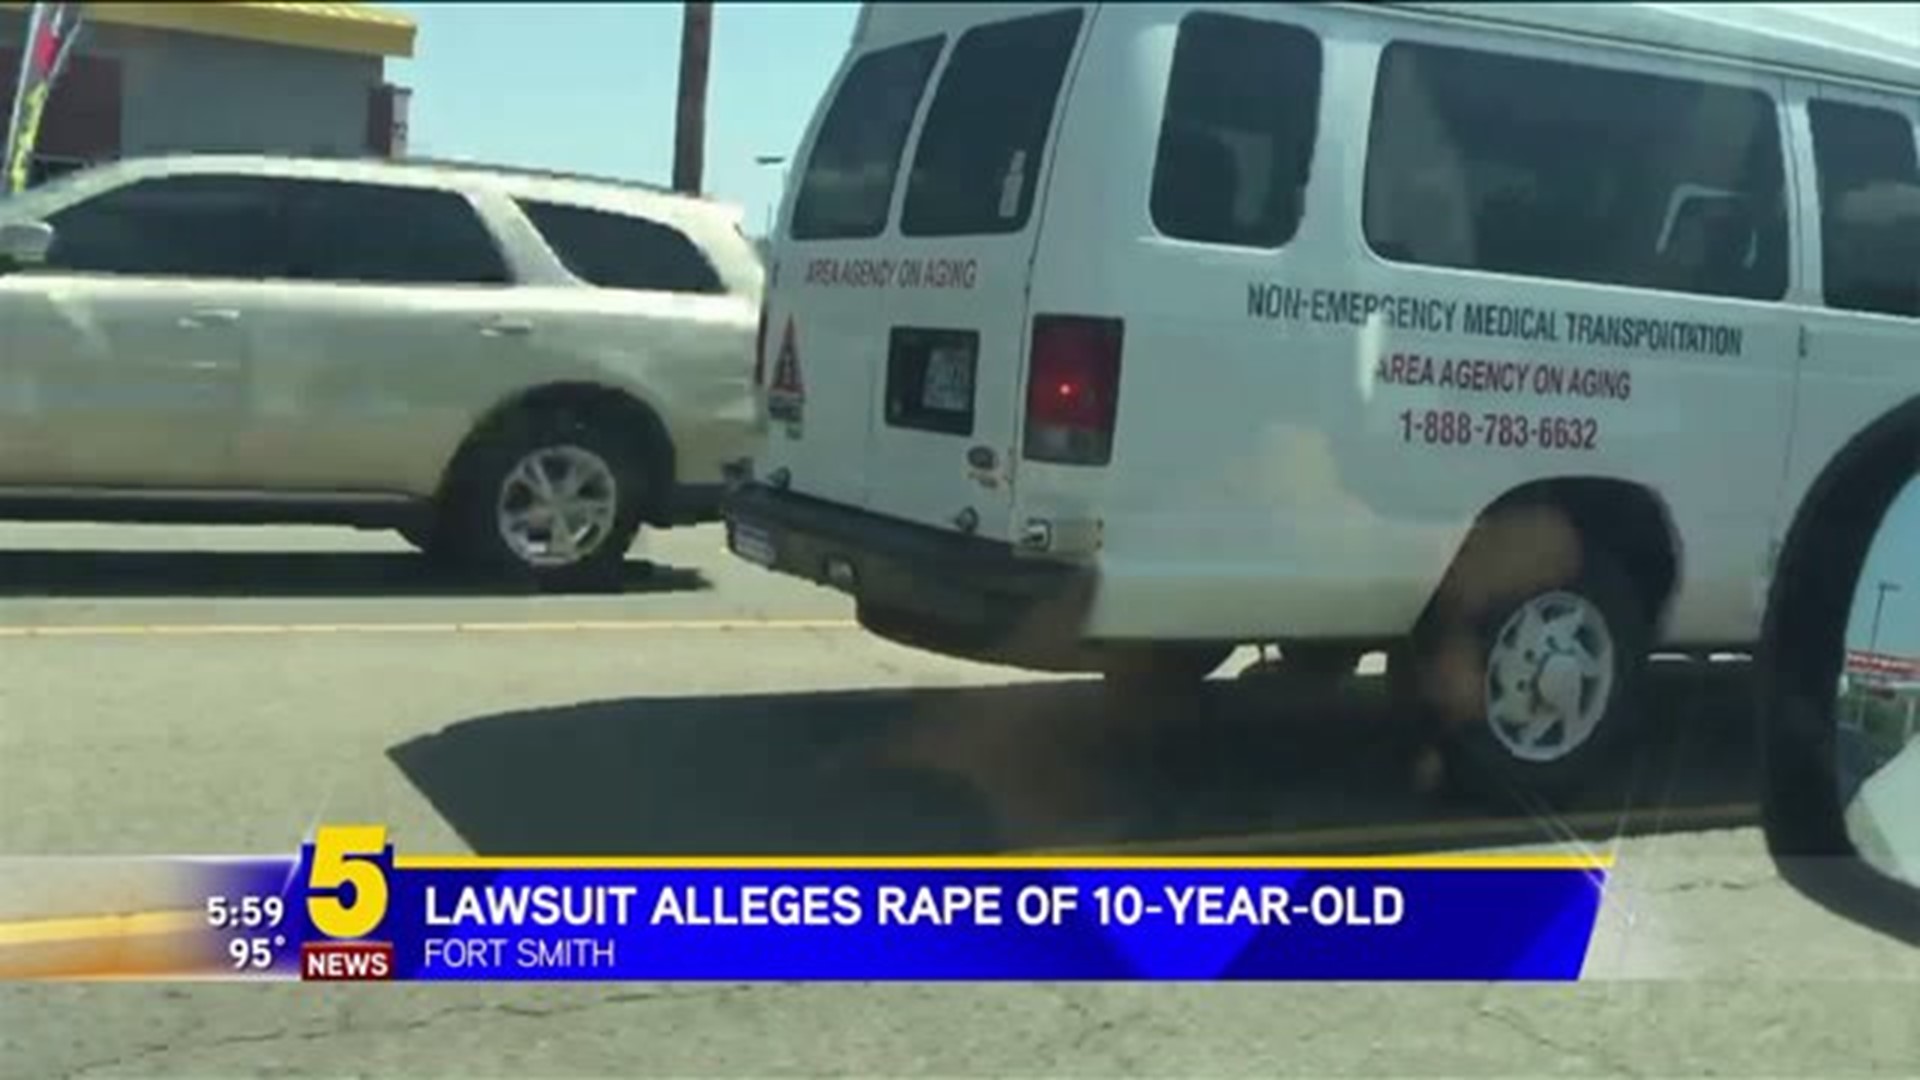 Lawsuit Alleges Rape Of 10-year-old